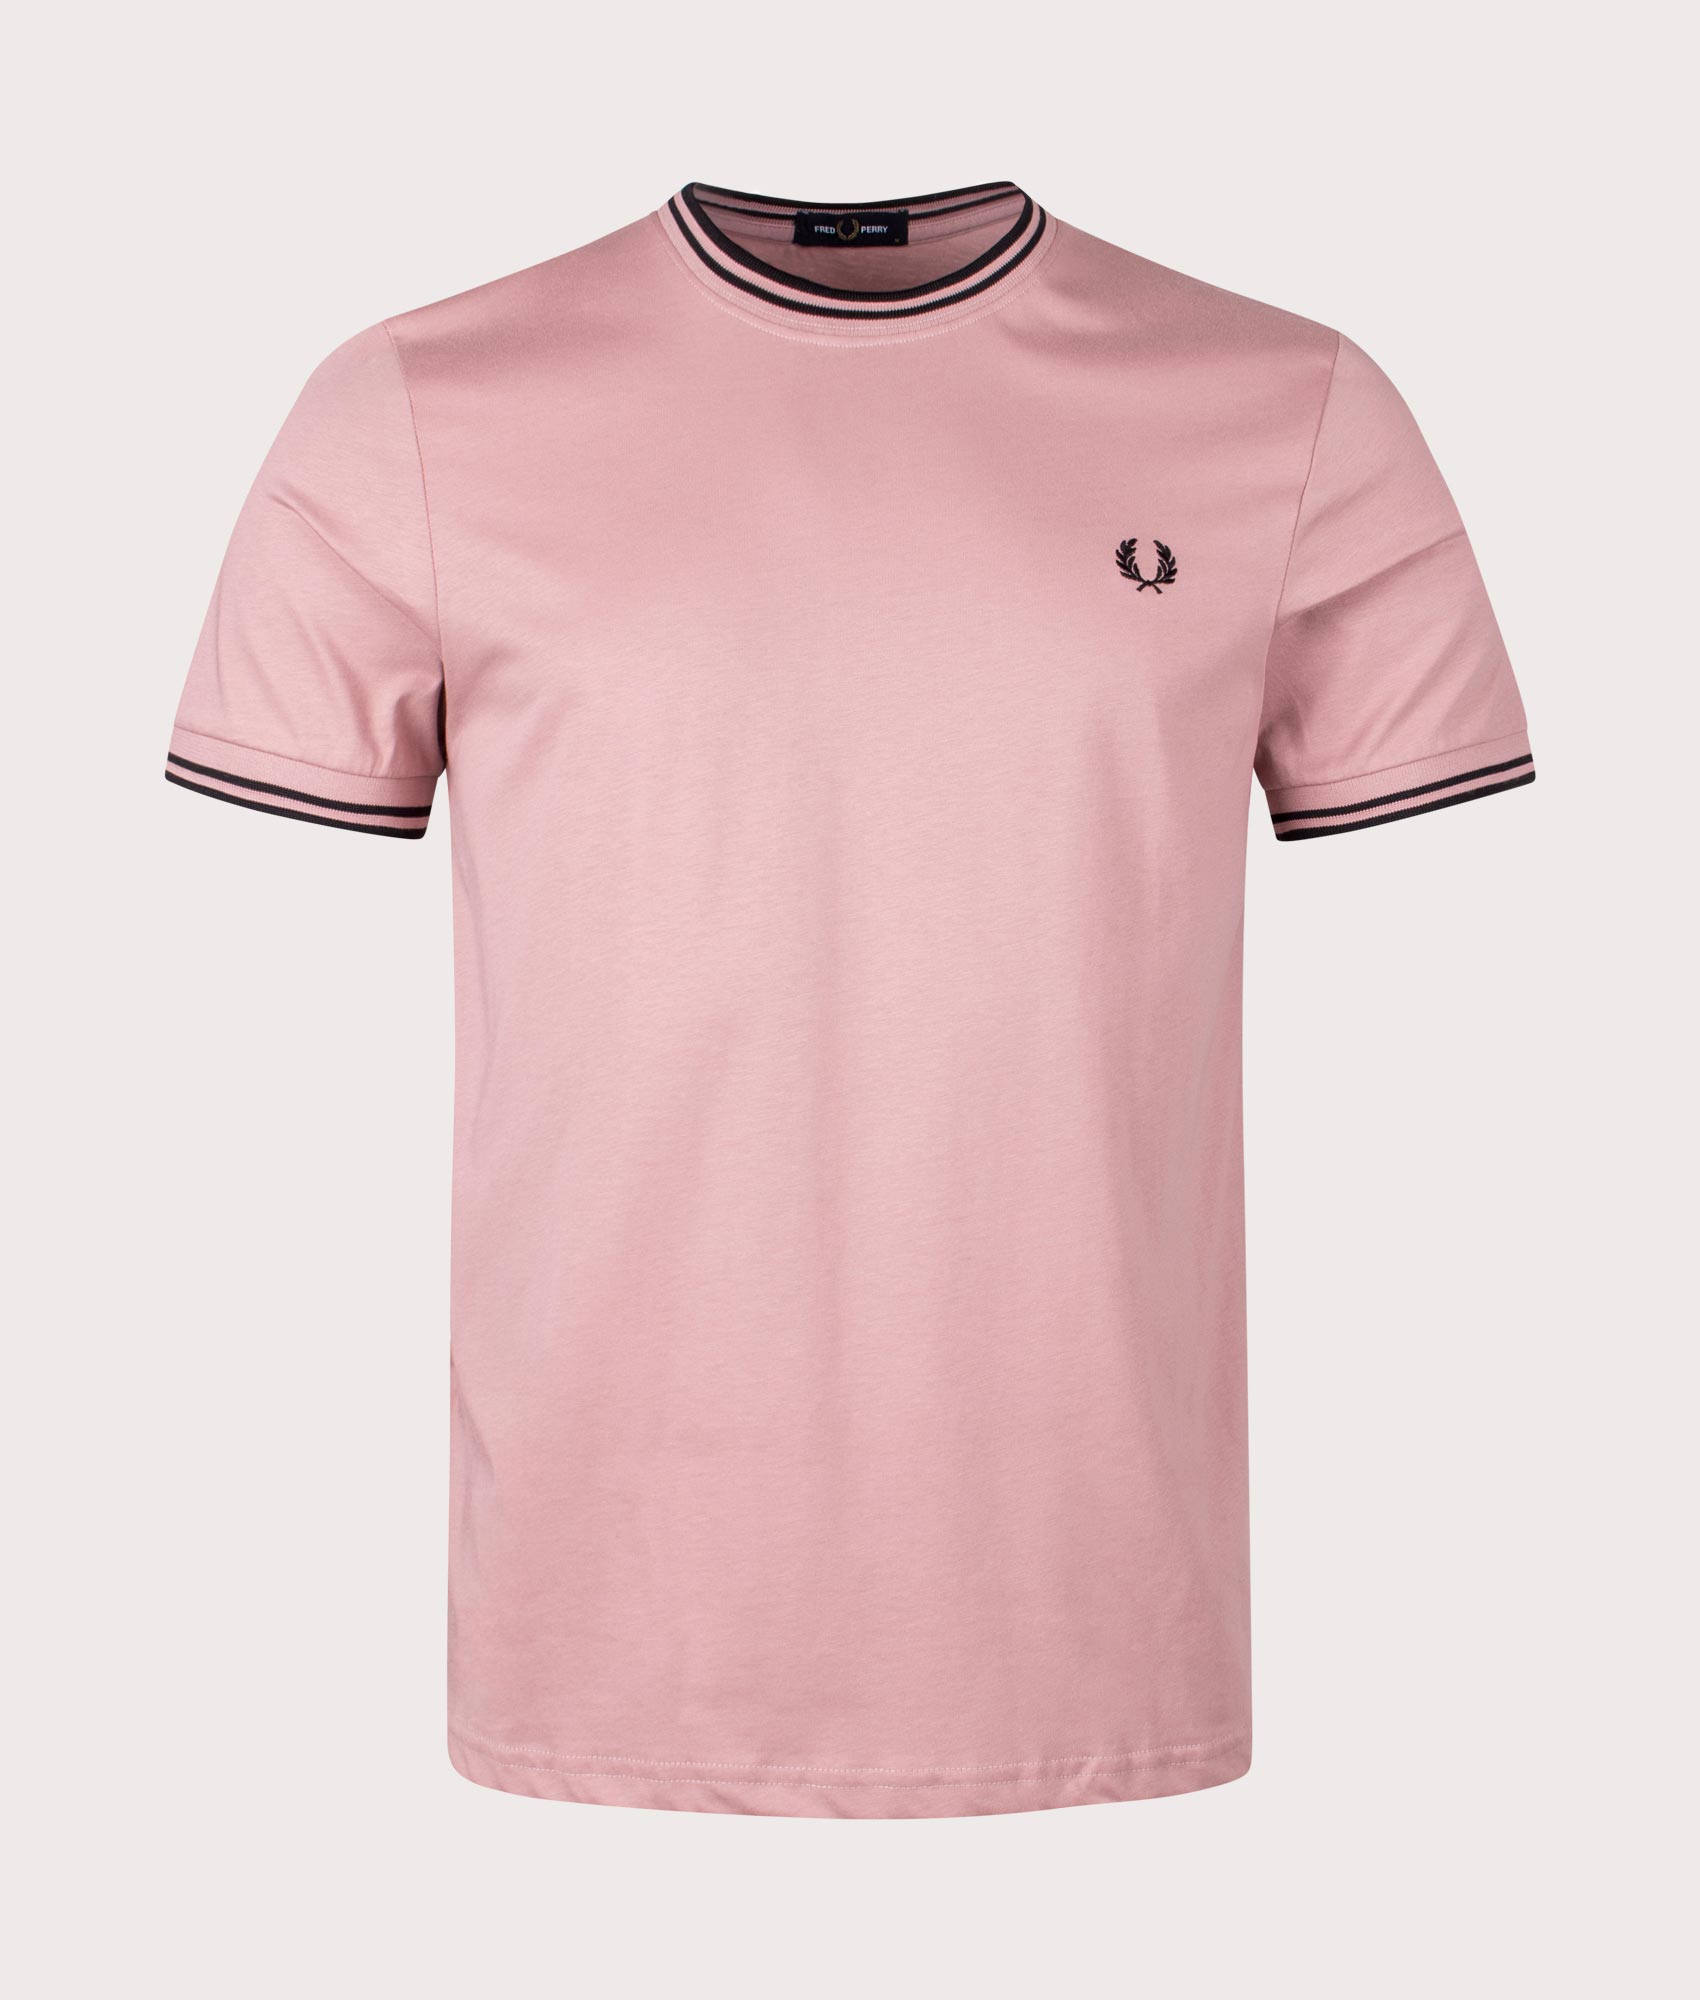 Fred Perry Mens Twin Tipped T-Shirt - Colour: T89 Dusty Rose Pink/Black - Size: XXL